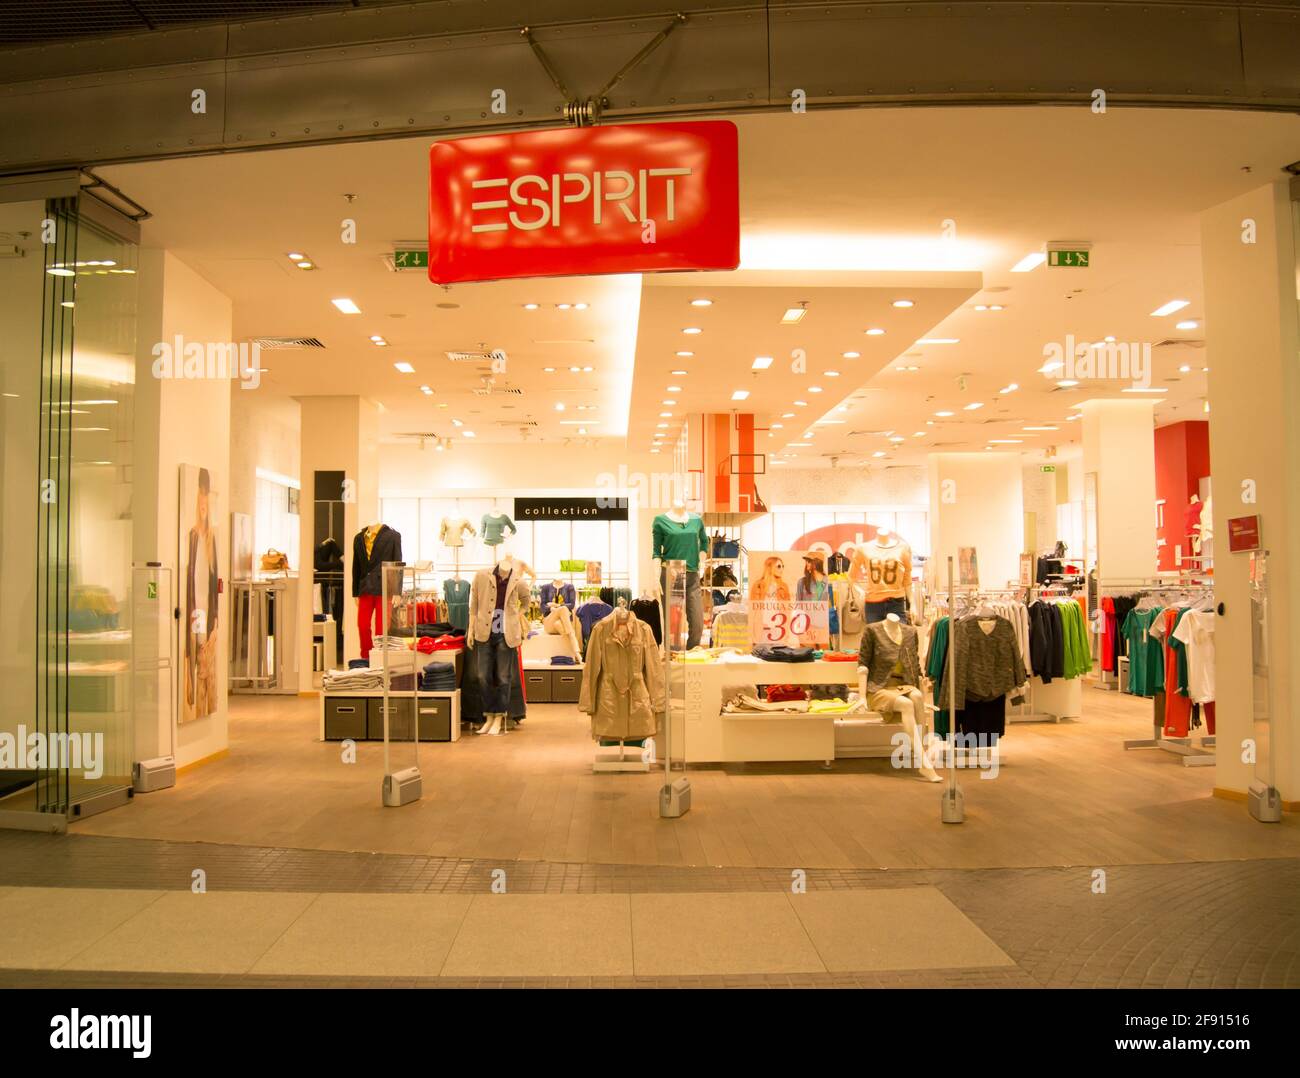 POZNAN, POLAND - Mar 11, 2013: A empty Esprit store in the late evening. This Esprit store is located in the shopping center Stary Browar. Stock Photo